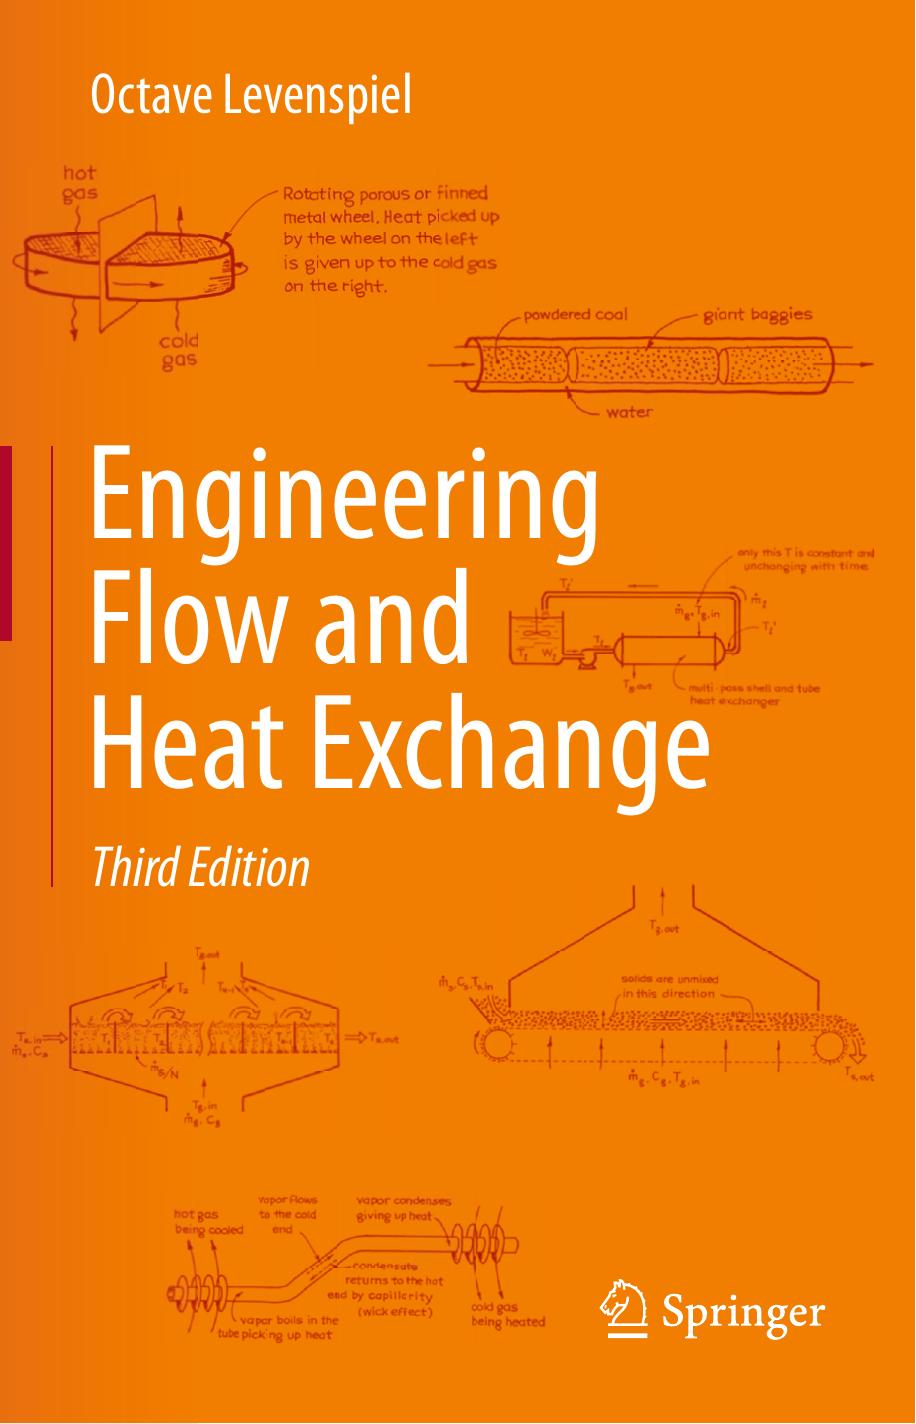 Engineering Flow and Heat Exchange by Octave Levenspiel